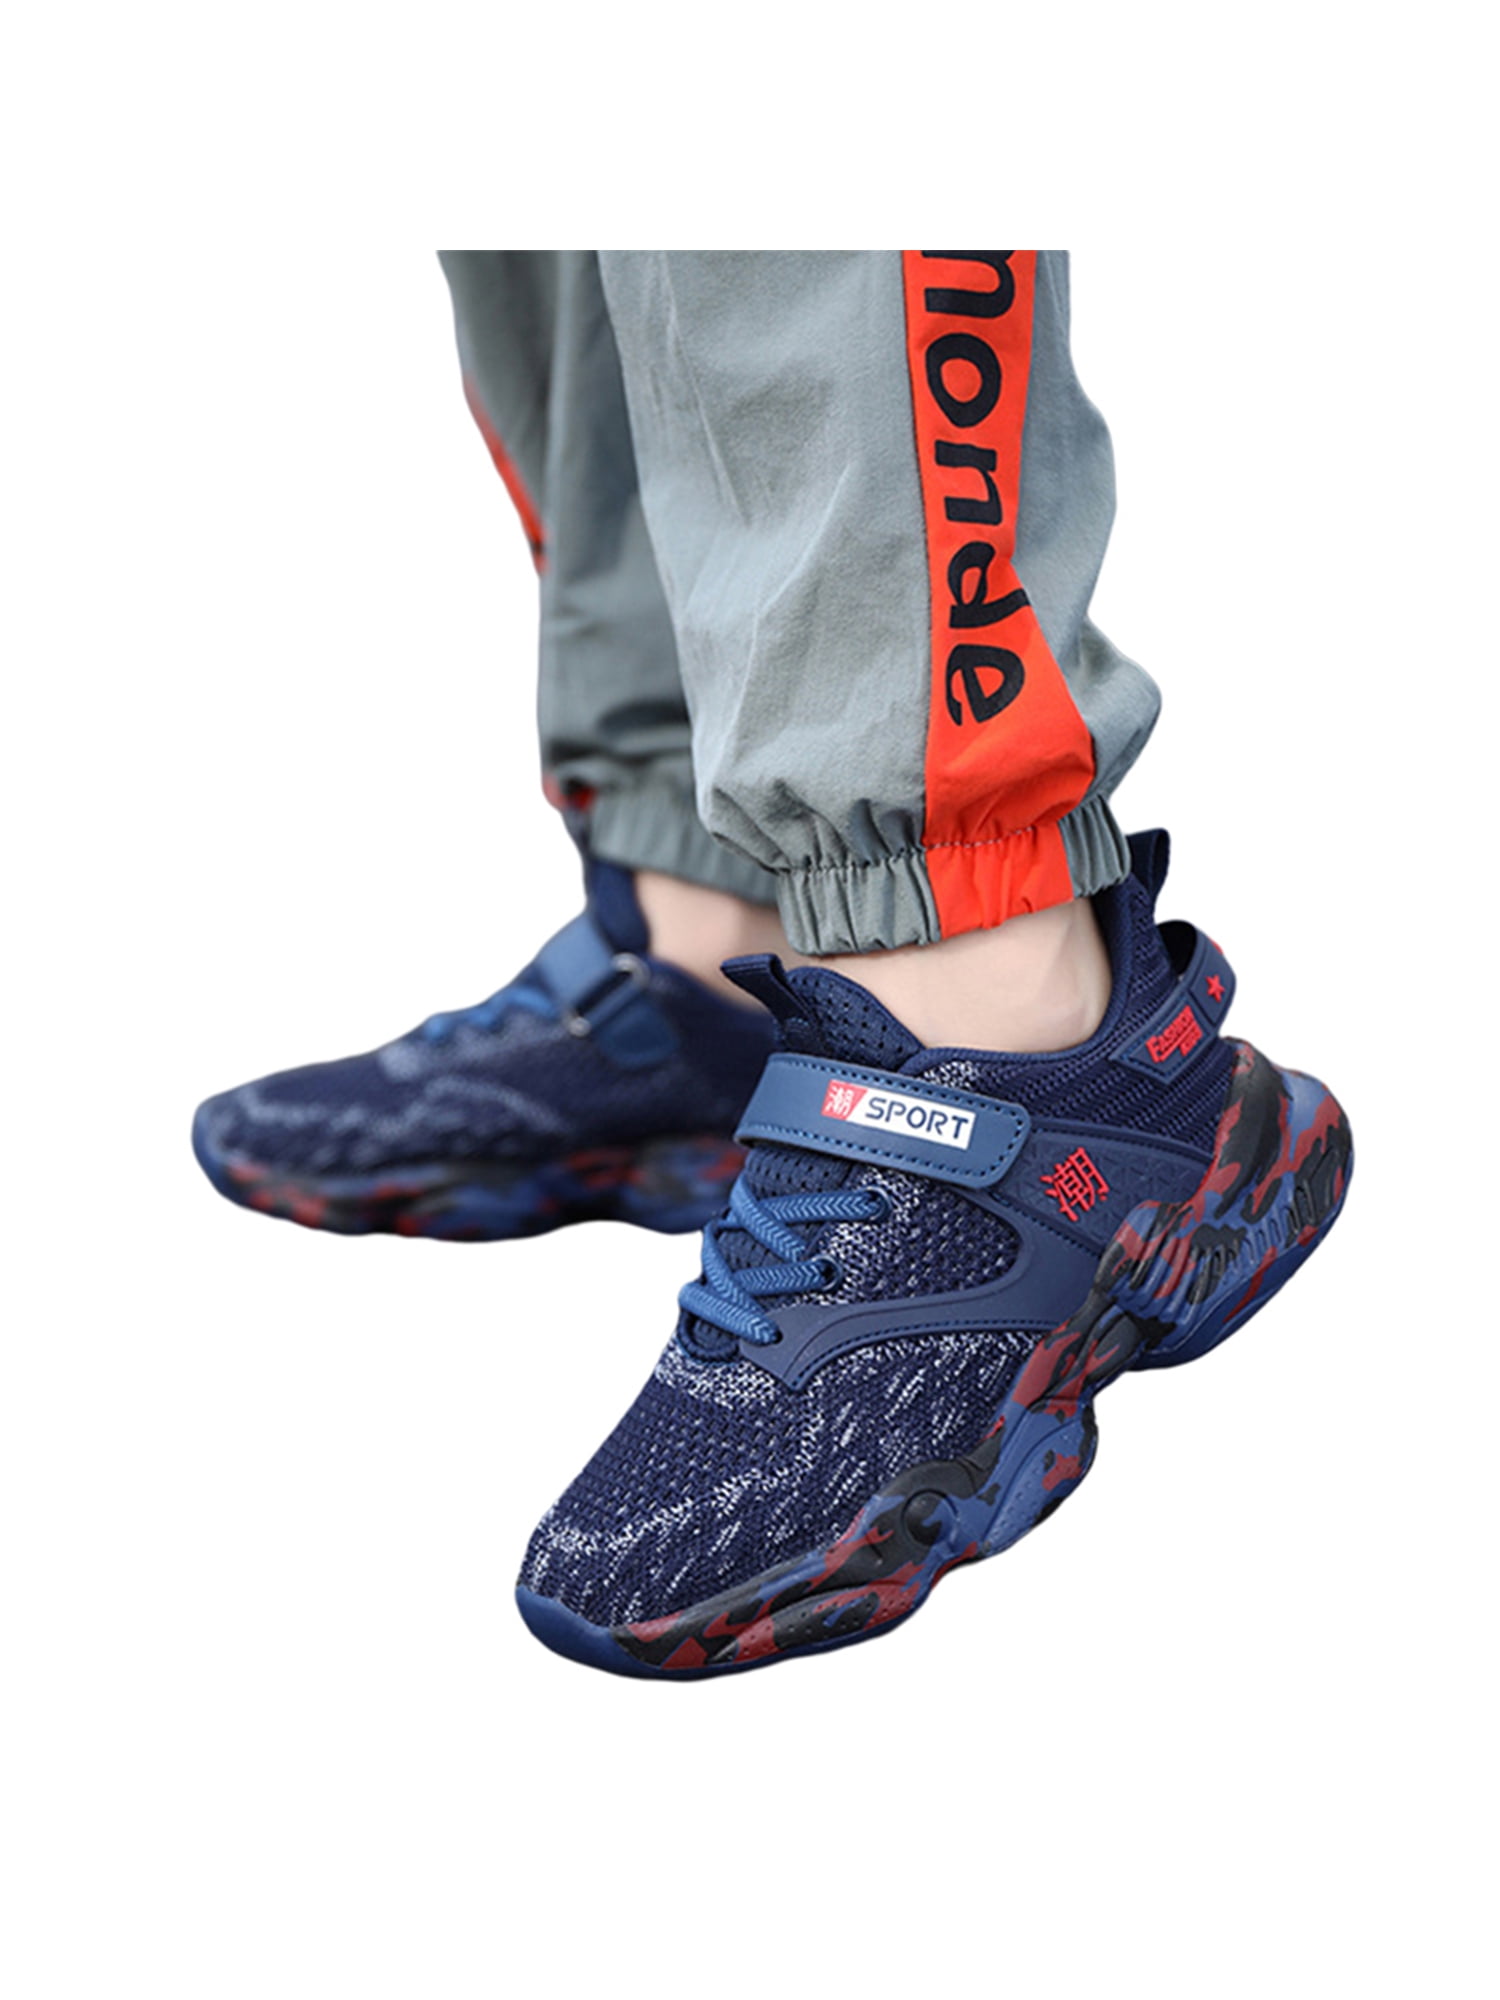 Boys Girls Trainers Kids Sneakers Athletic Casual Running Shoes Child Sports Walking Shoes Fashion Comfortable